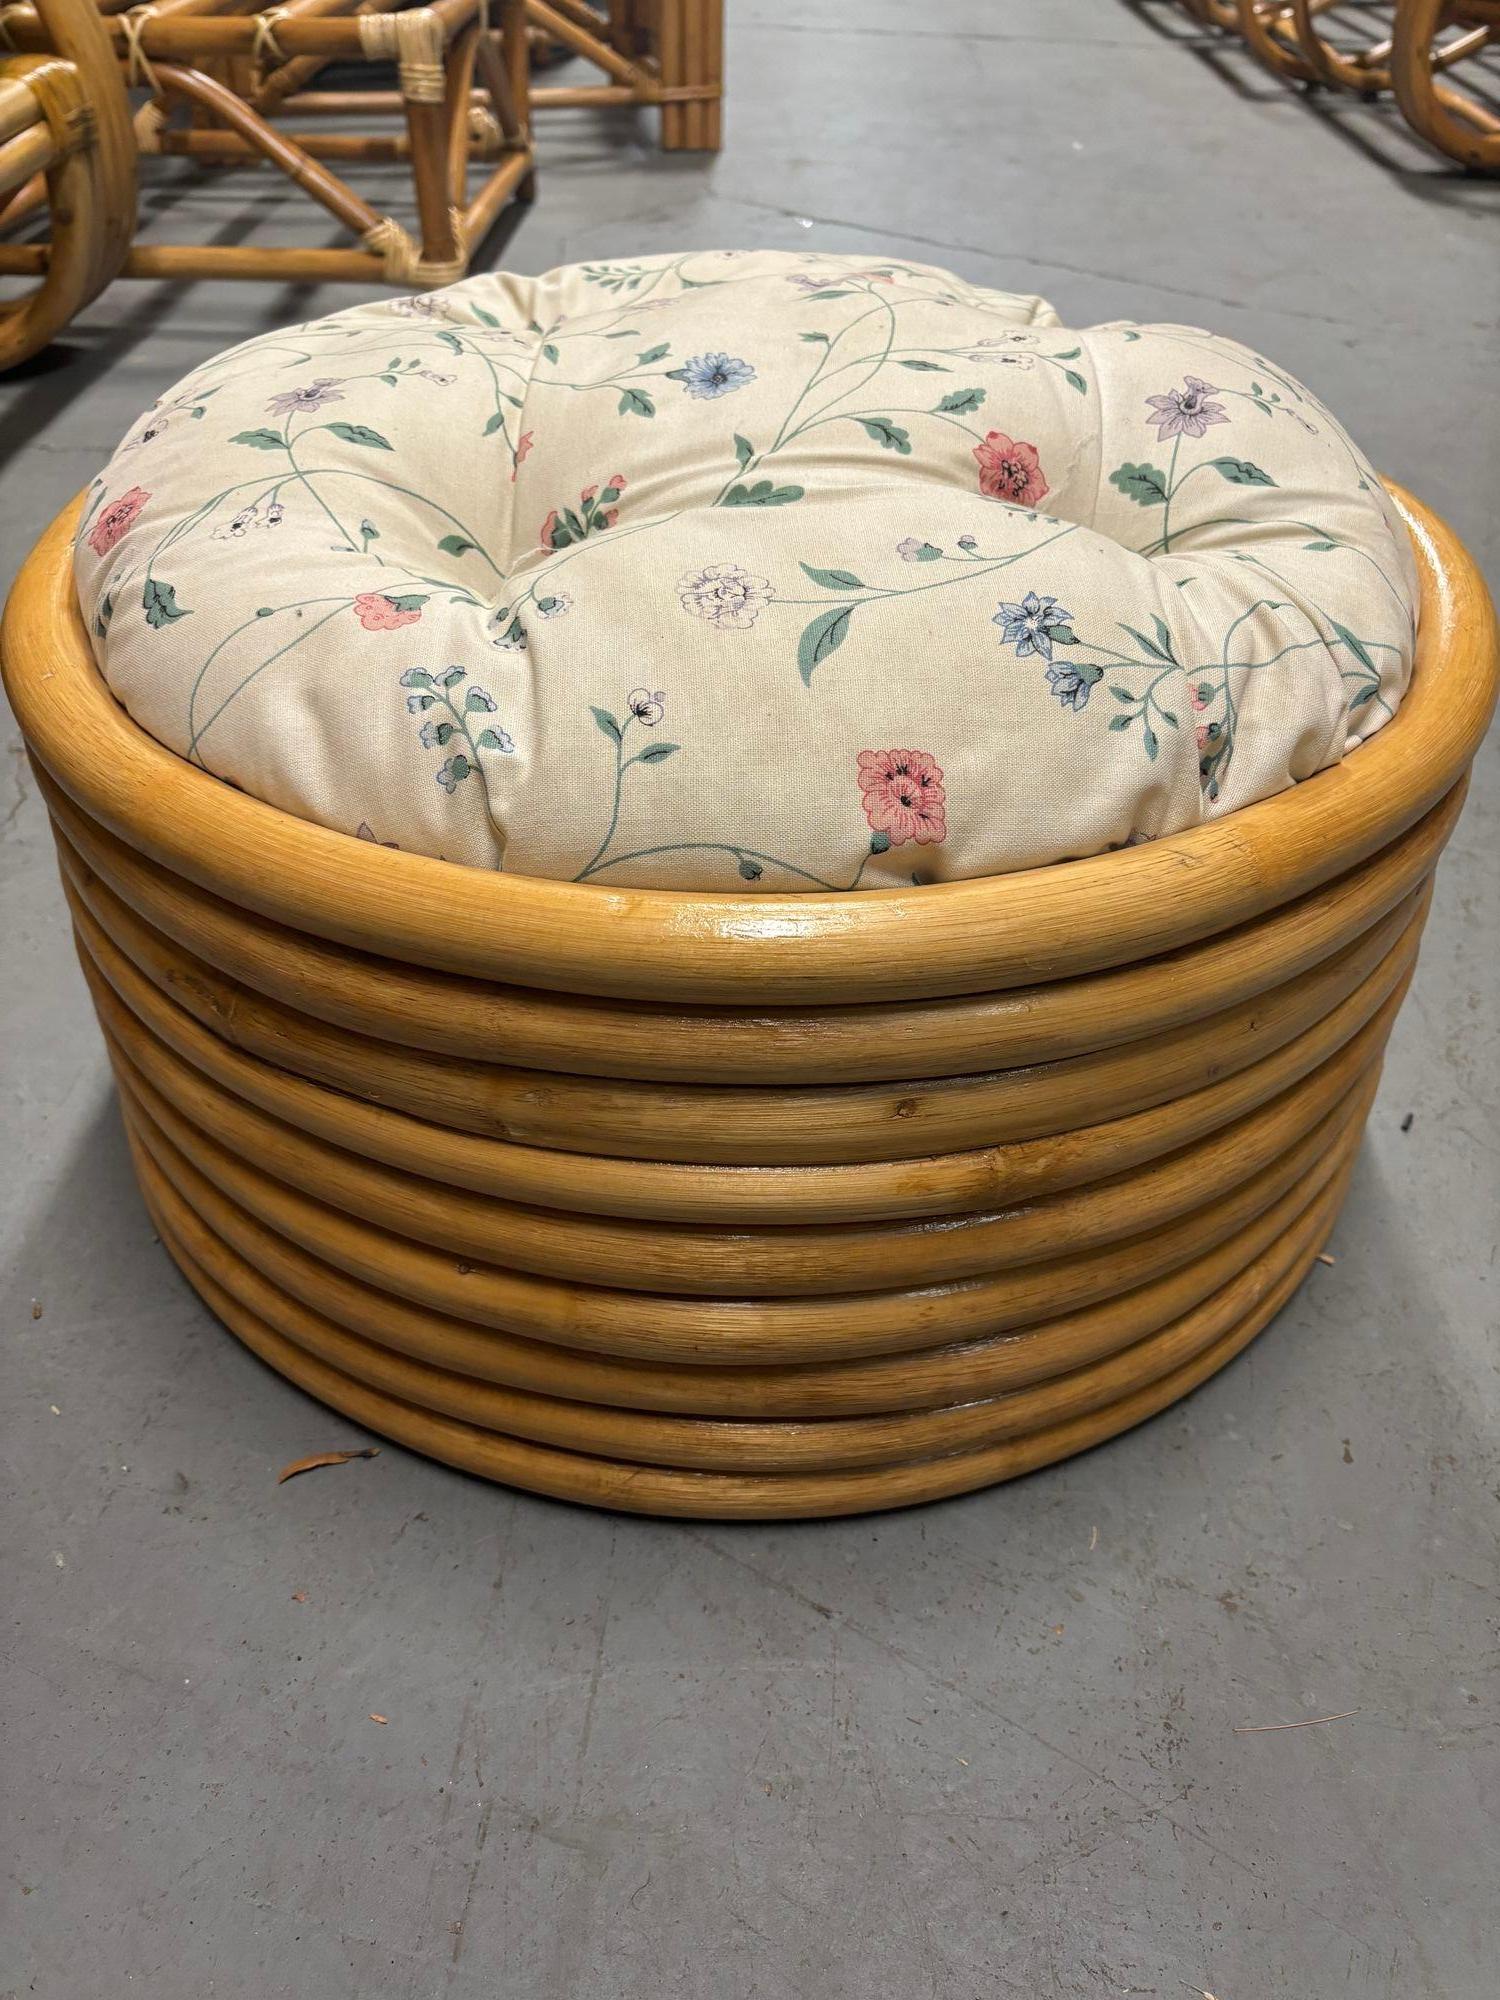 Restored Rattan Round Ottoman 9-Strand In Excellent Condition For Sale In Van Nuys, CA